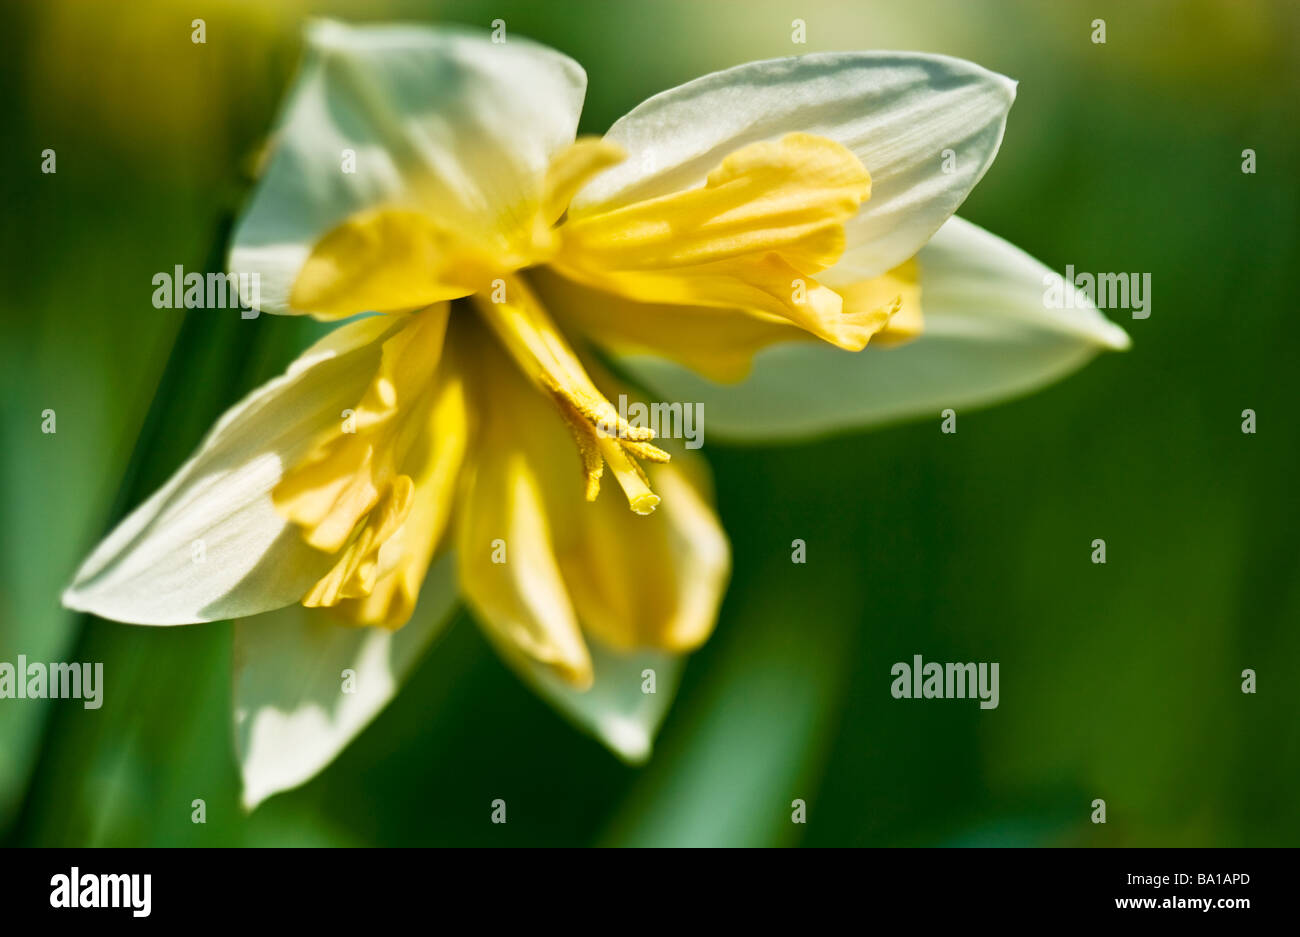 A split corona variety species or cultivar of daffodil or Narcissus Stock Photo